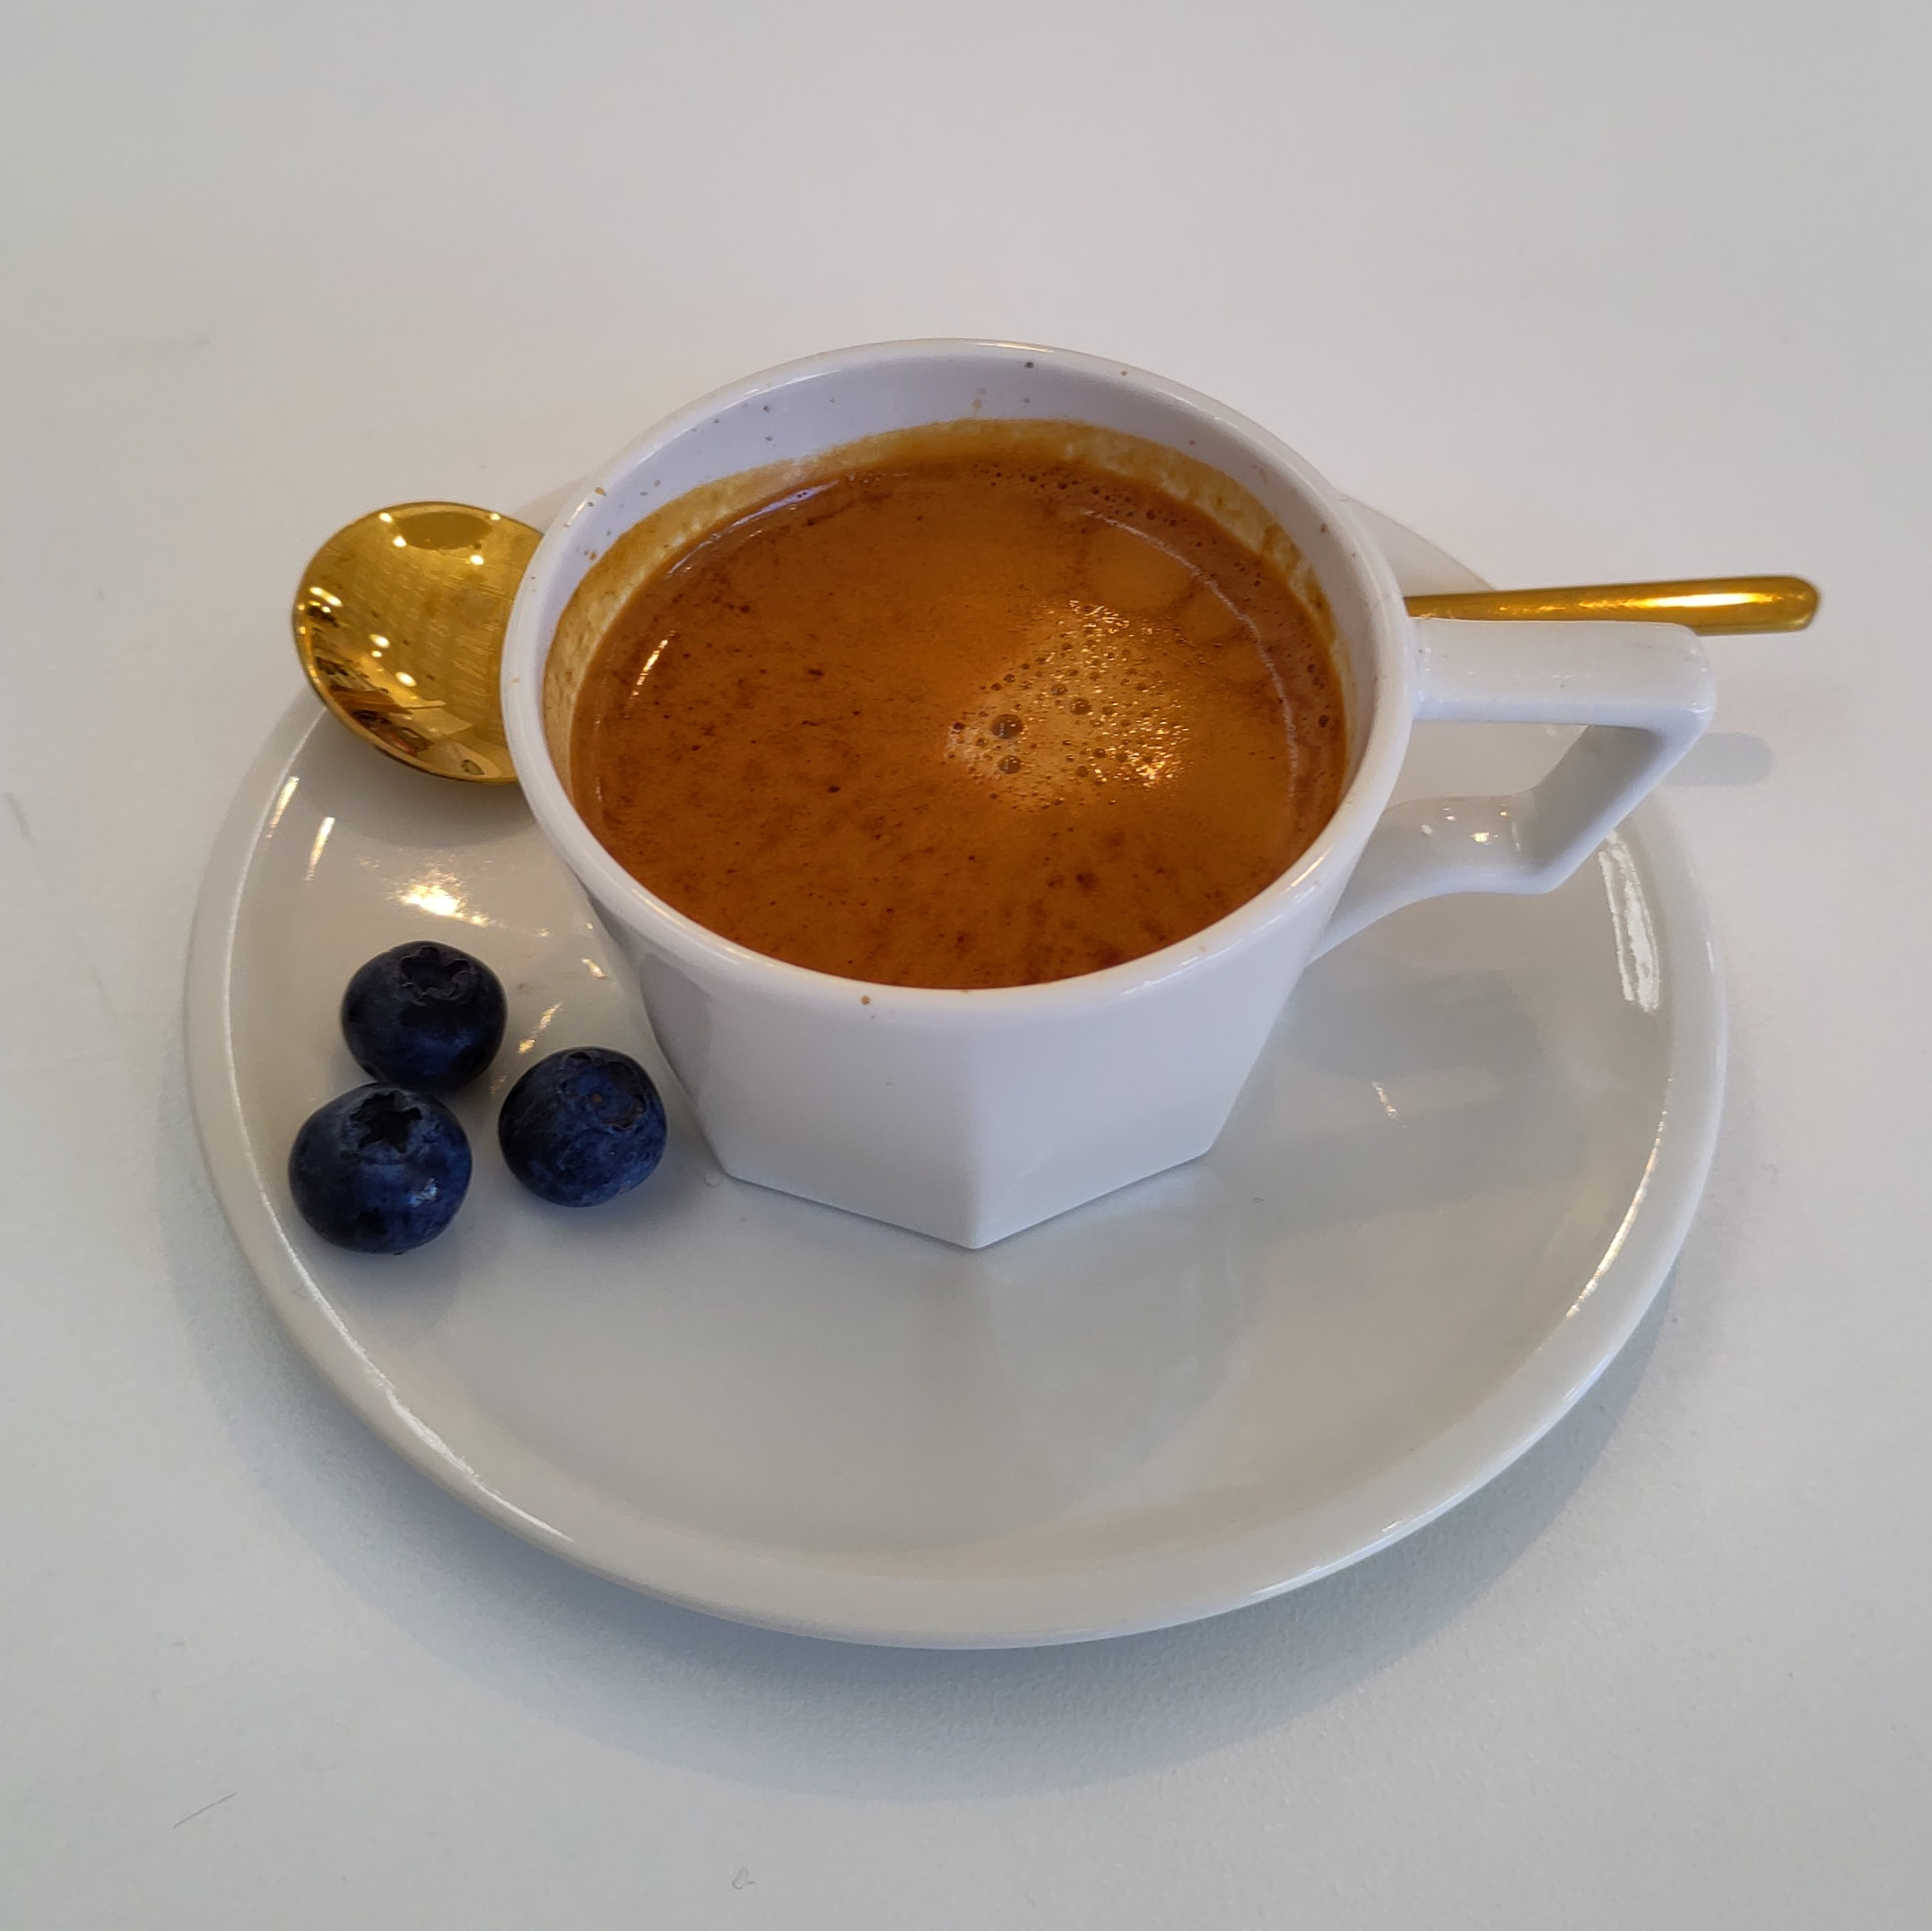 My espresso, a washed Colombian from Black & White Coffee Roasters, served in an interesting cup at Spro Coffee Lab in San Francisco, along with three blueberries as palate cleansers.